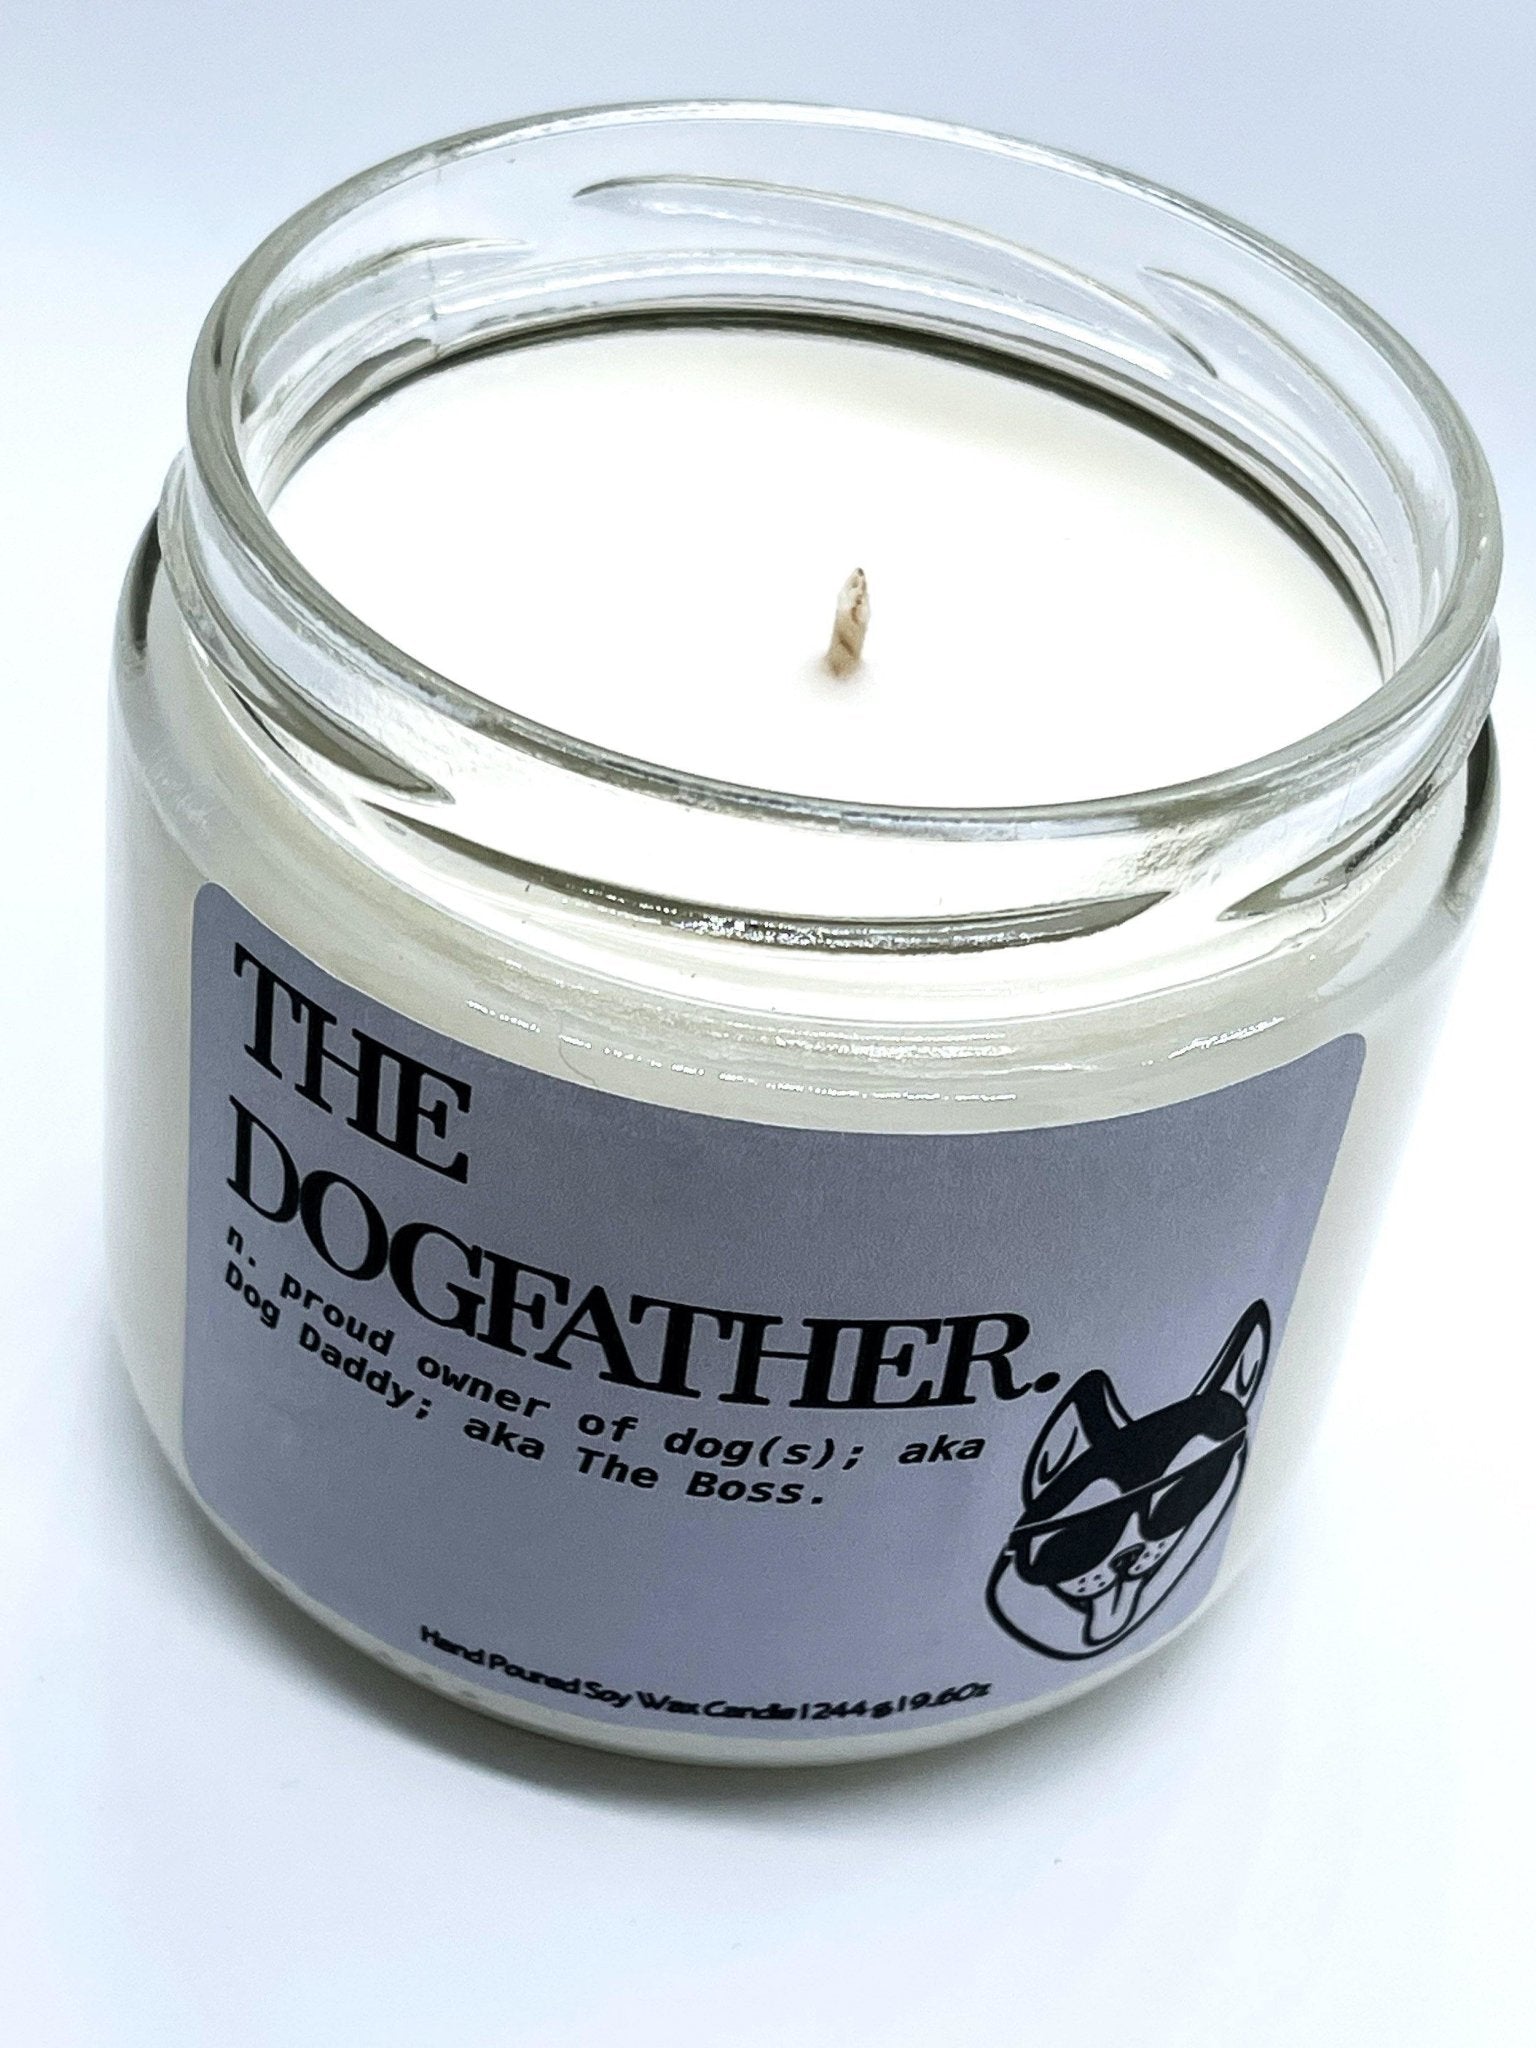 The Dogfather Candle - Masculine Scented Candle - Wicks+Paws Candle Co